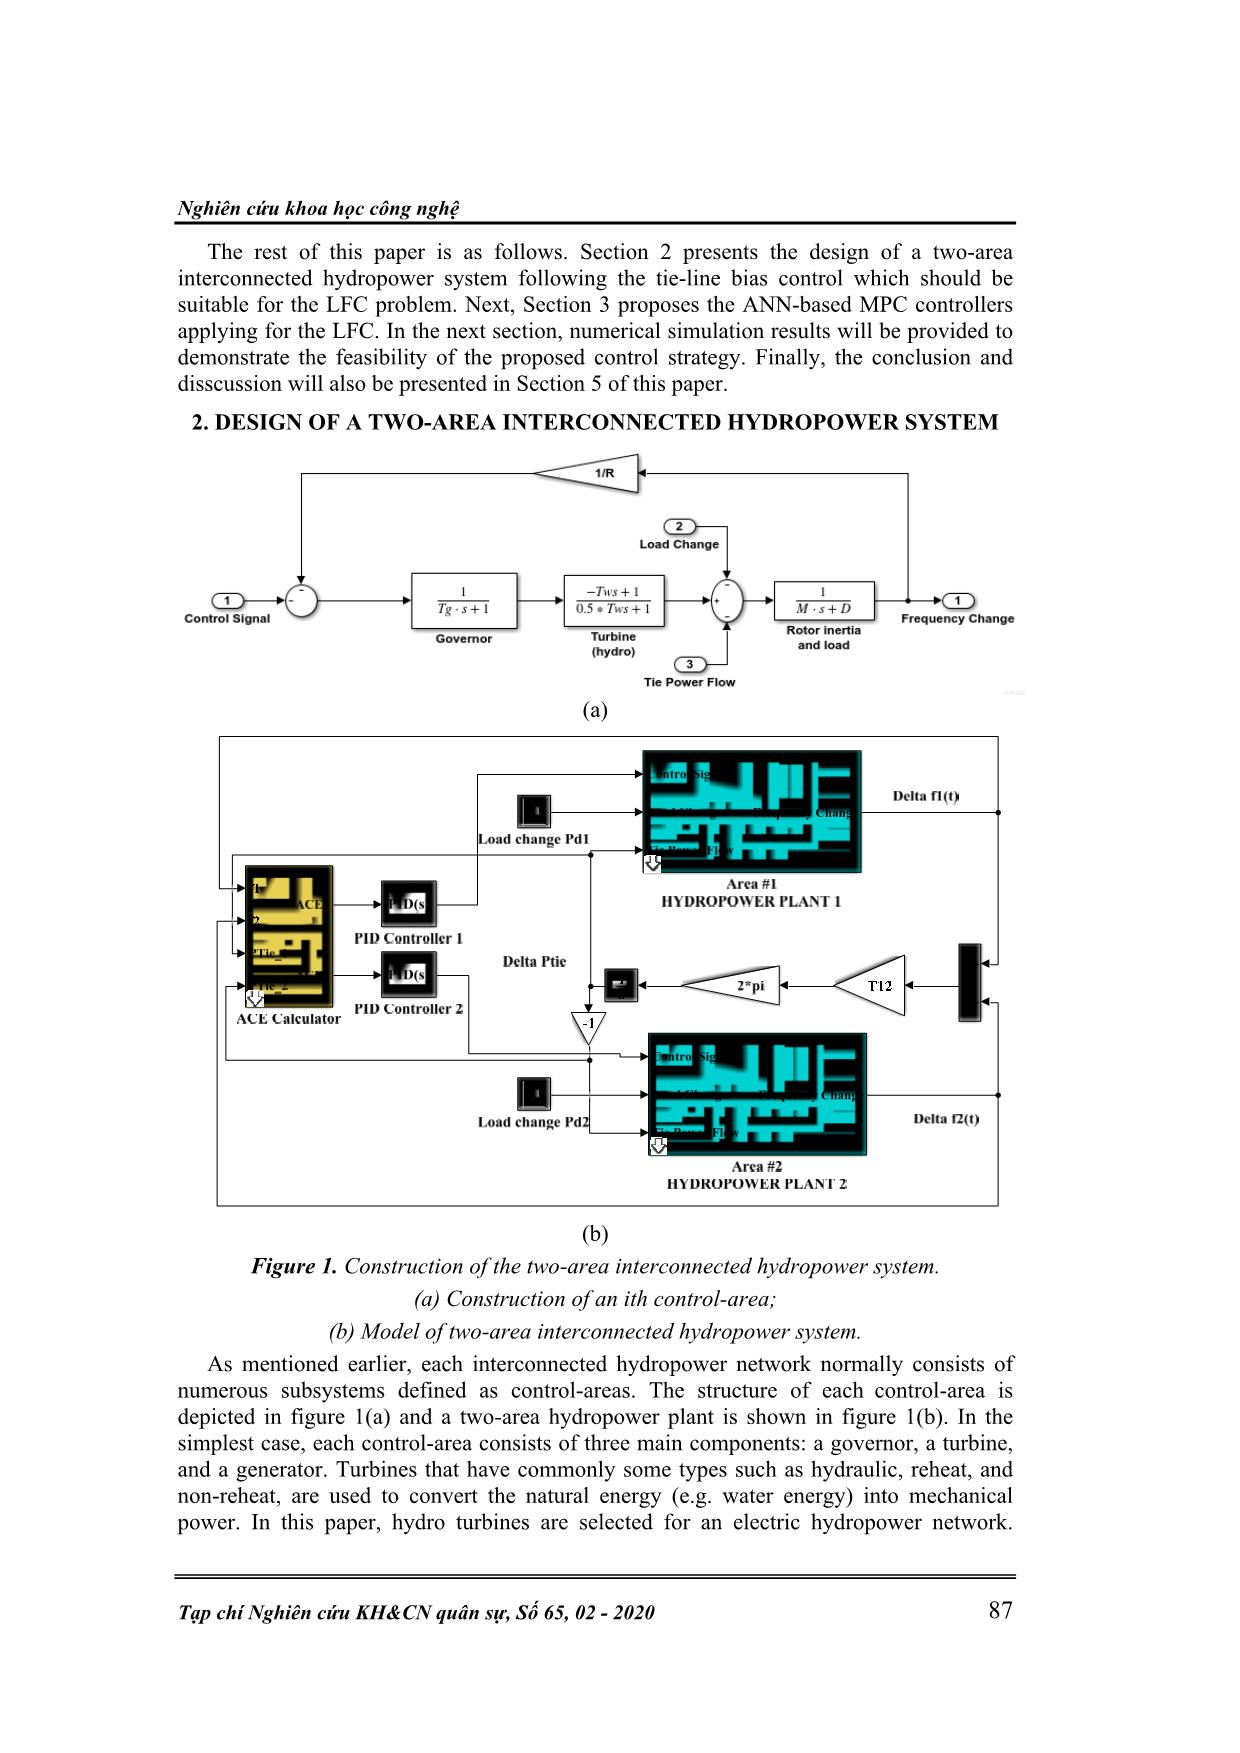 Study on application of ann - based mpc controllers for load-frequency control of an interconnected hydropower plant trang 2